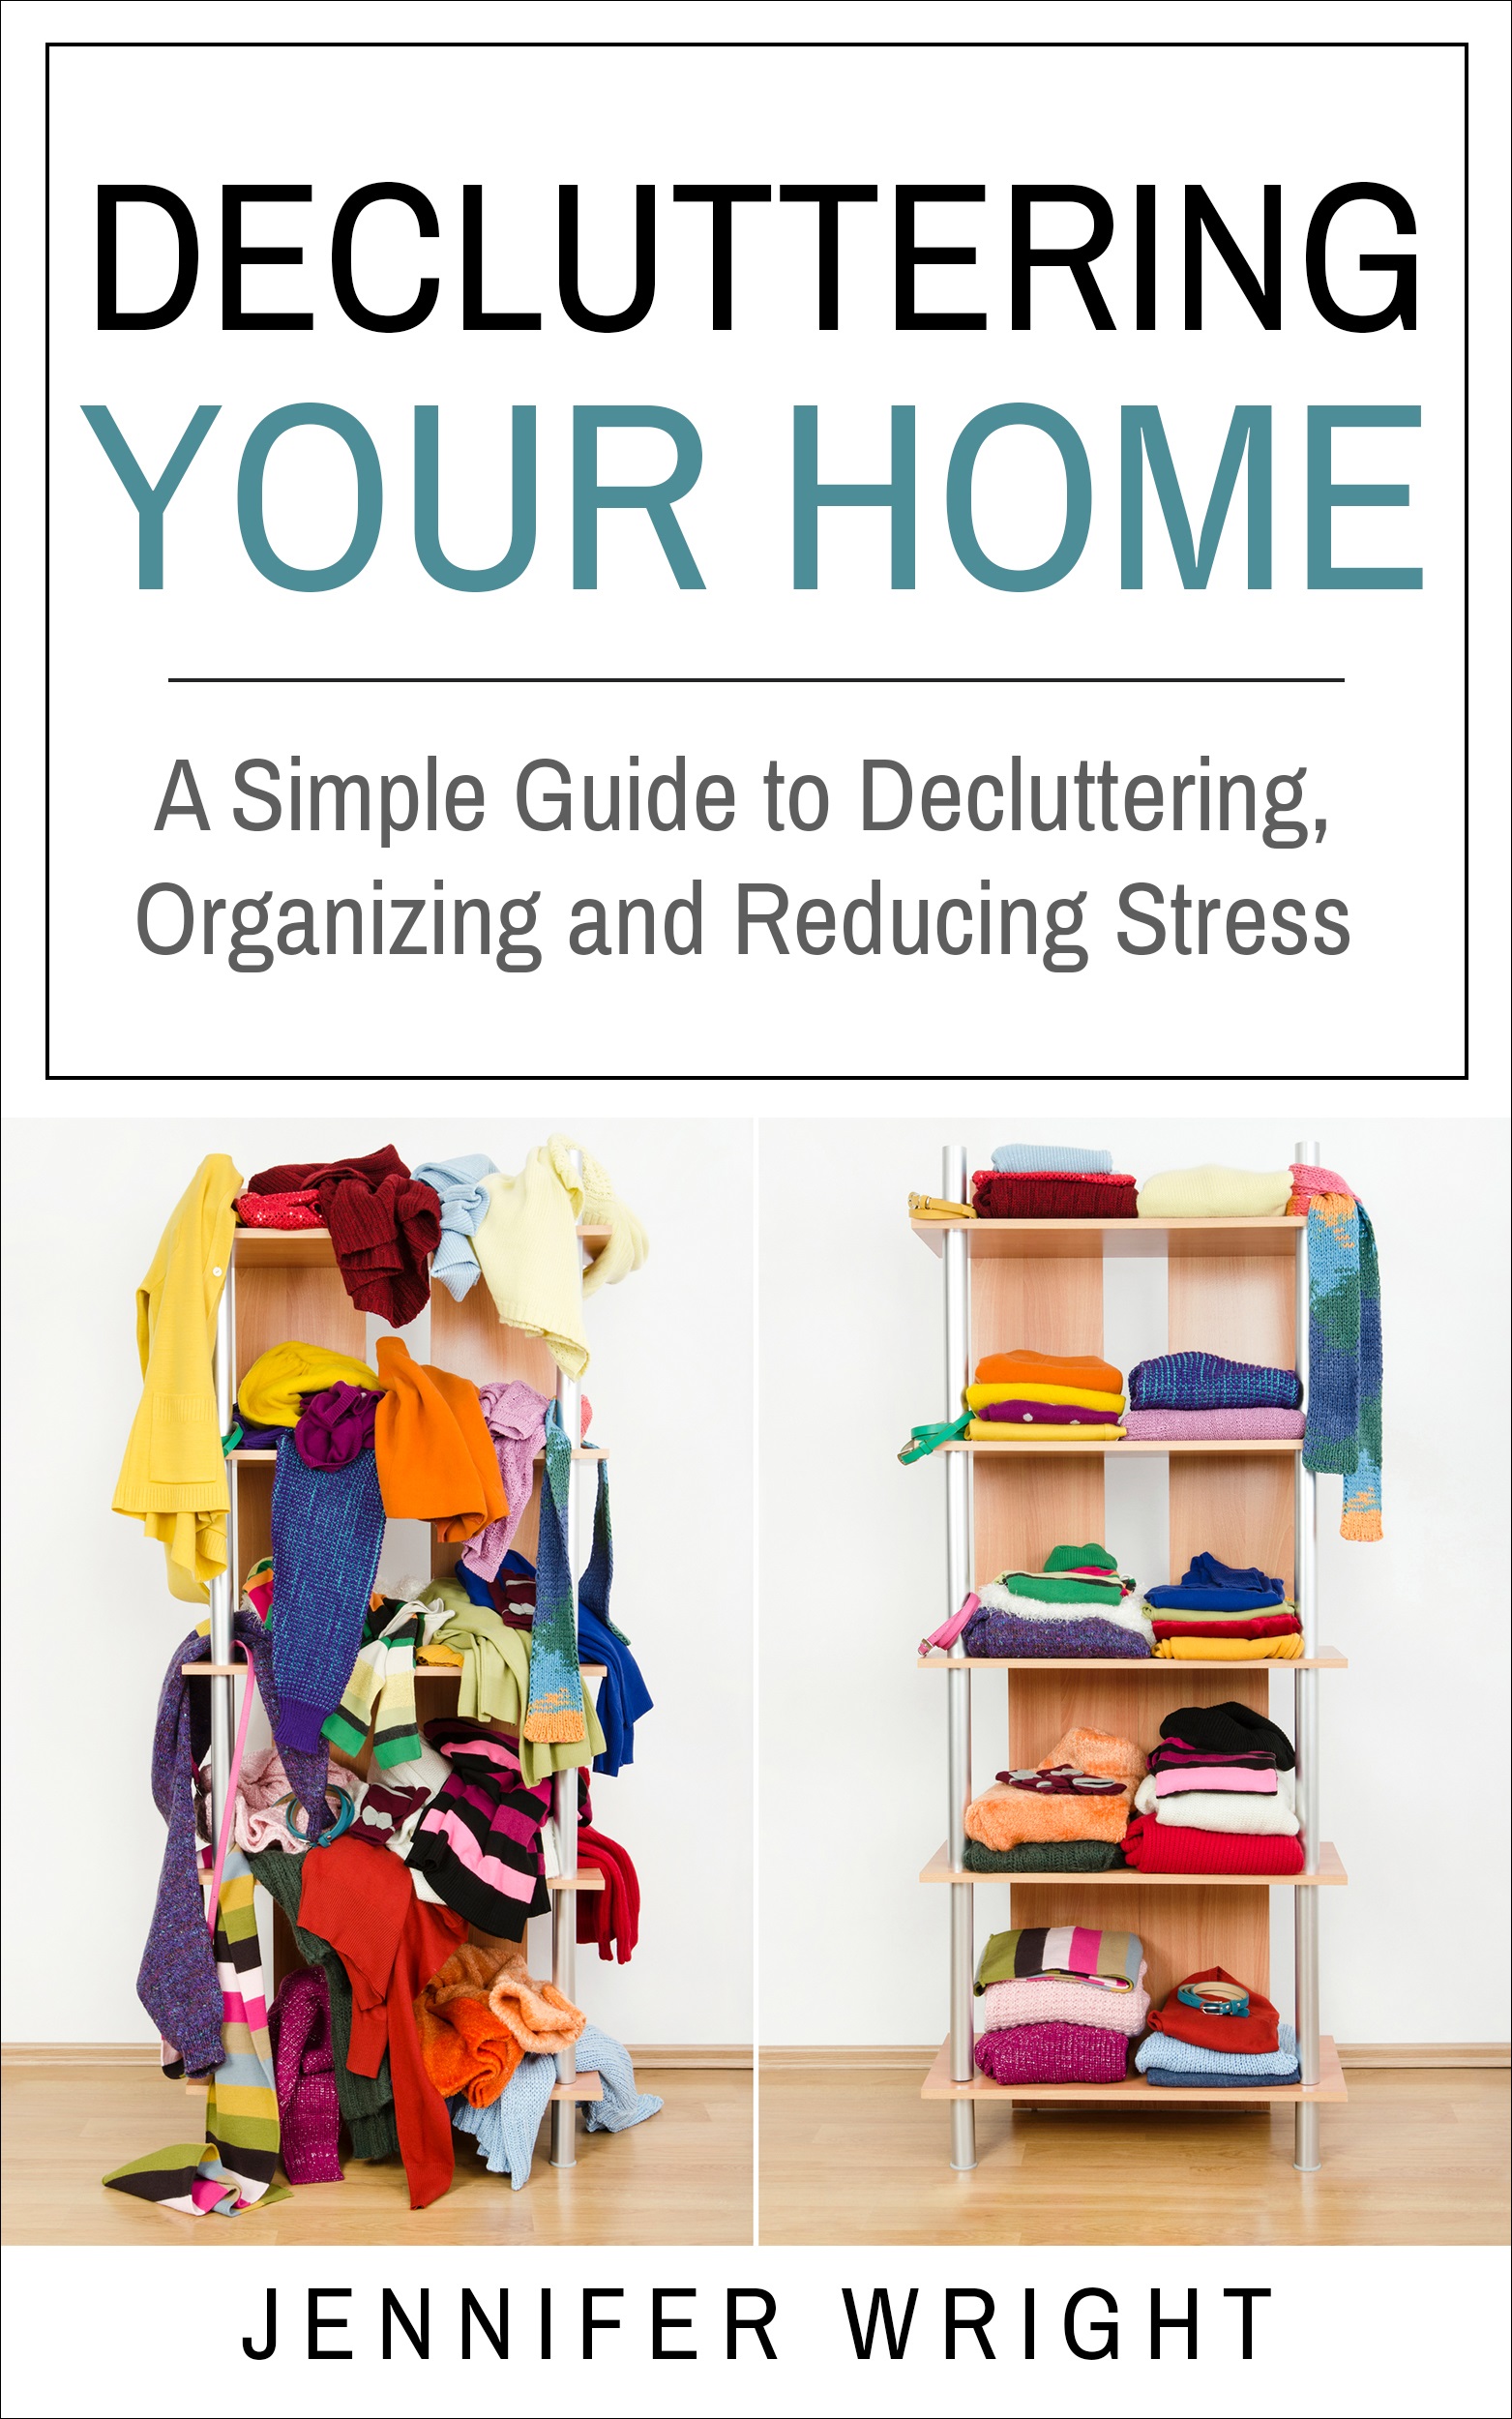 FREE: Decluttering Your Home: A Simple Guide to Decluttering, Organizing and Reducing Stress by Jennifer Wright